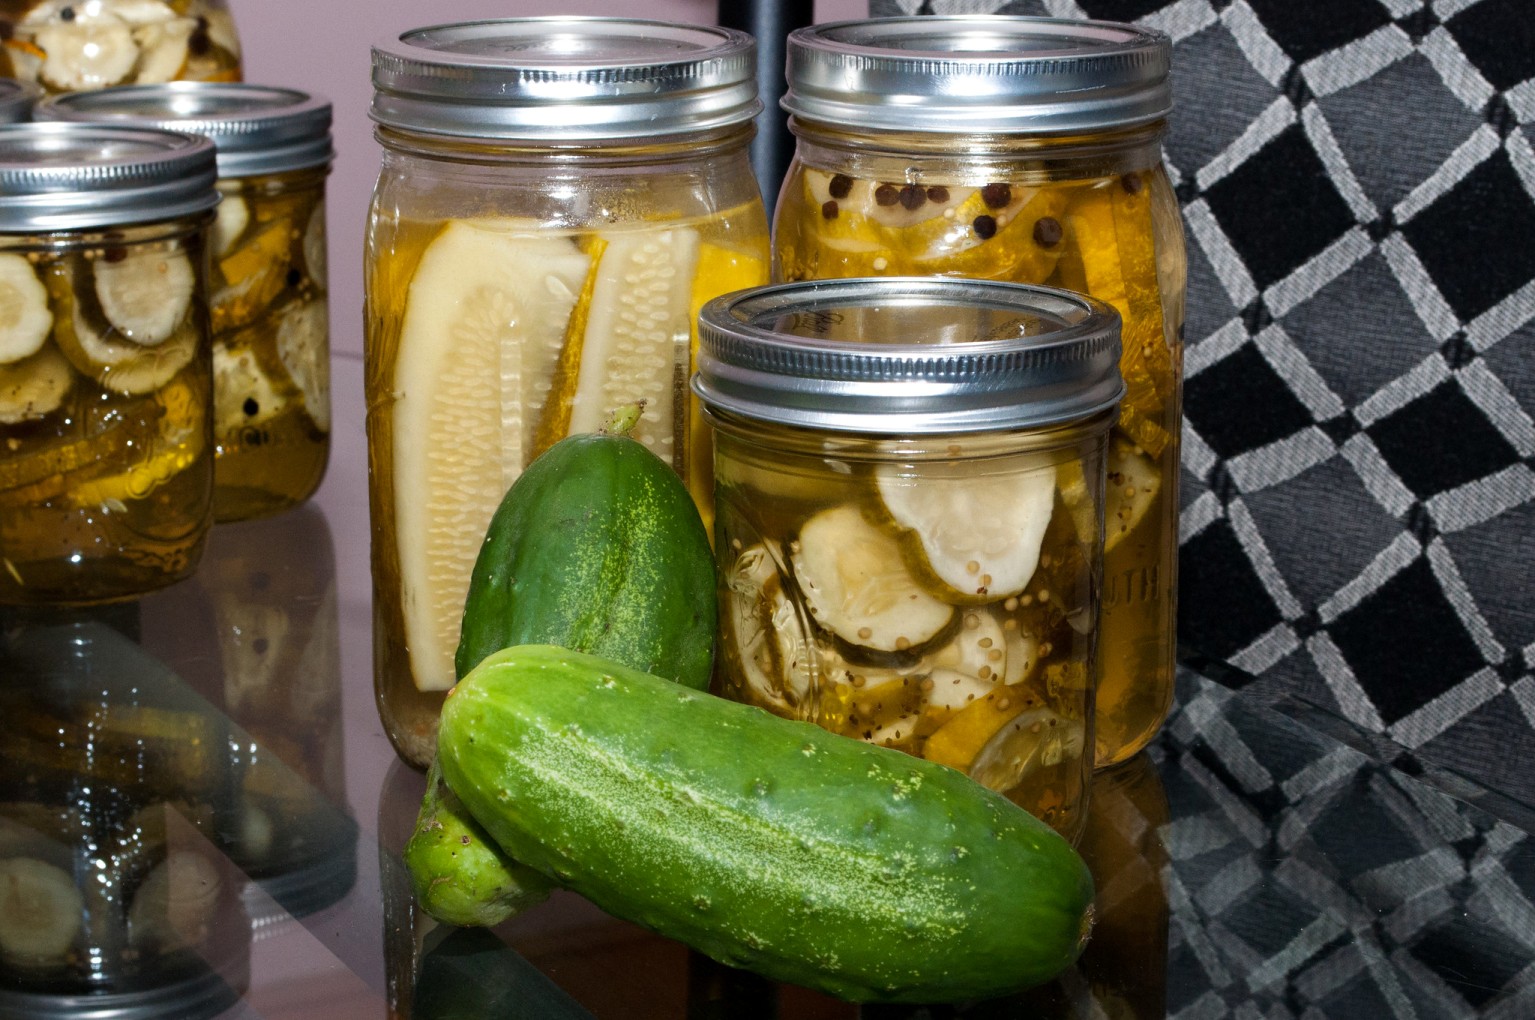 Food Review: B&G Pickles